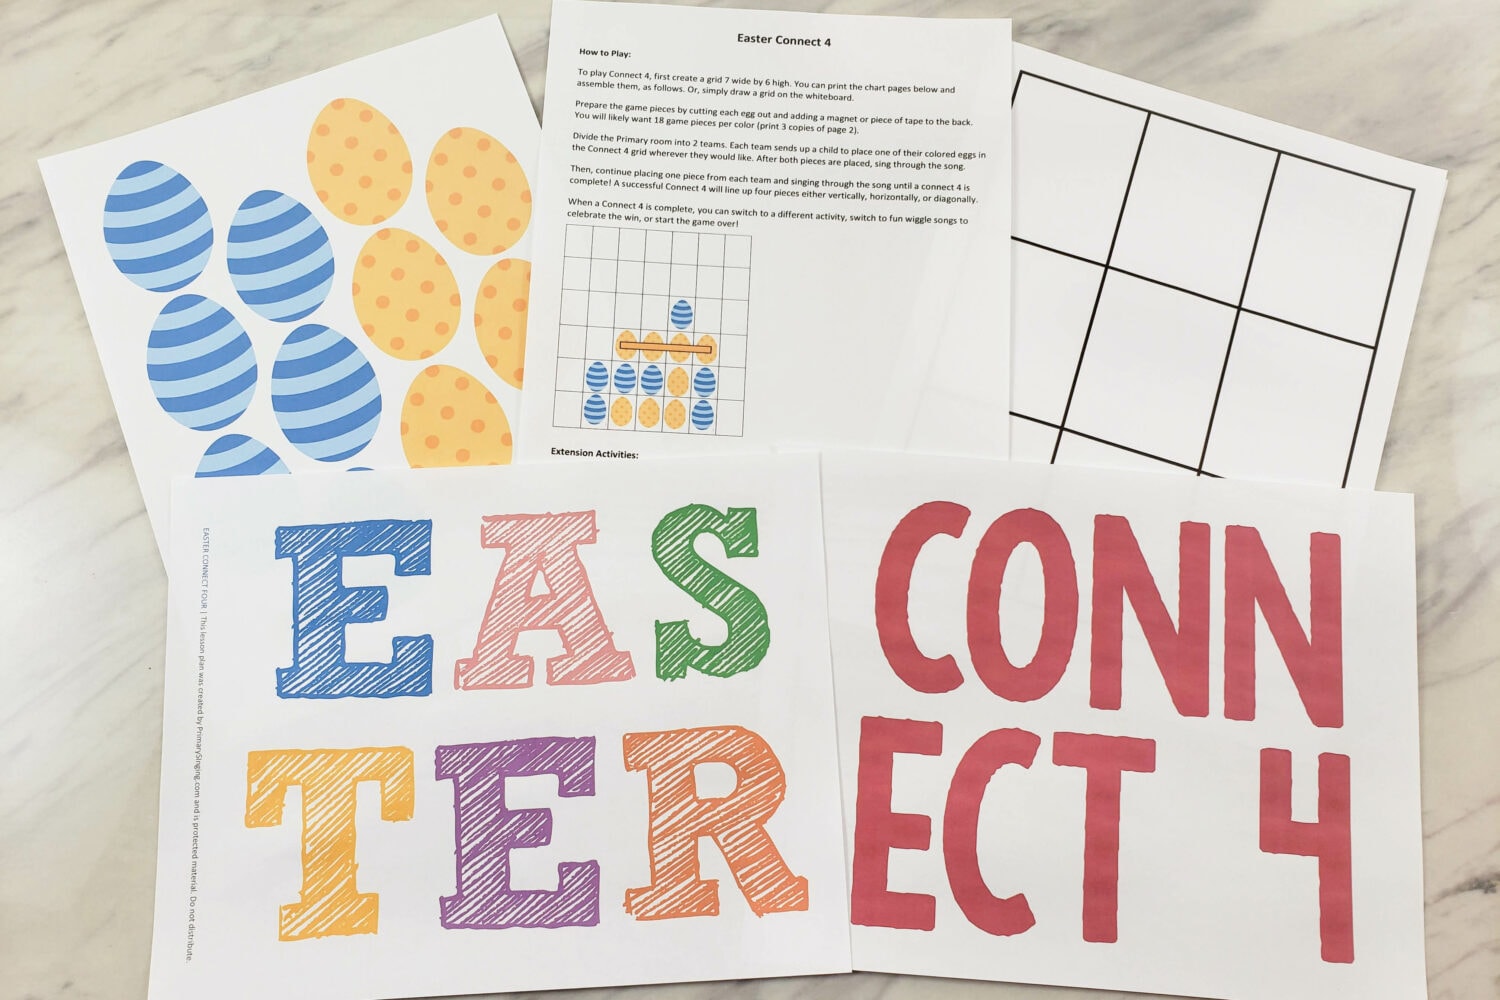 Easter Primary Connect 4 singing time game - Use these cute printable song helps to play a fun game together as a Primary perfectly themed for Easter! Includes a Connect 4 game board and colorful Easter eggs as game pieces. LDS Primary music leaders.